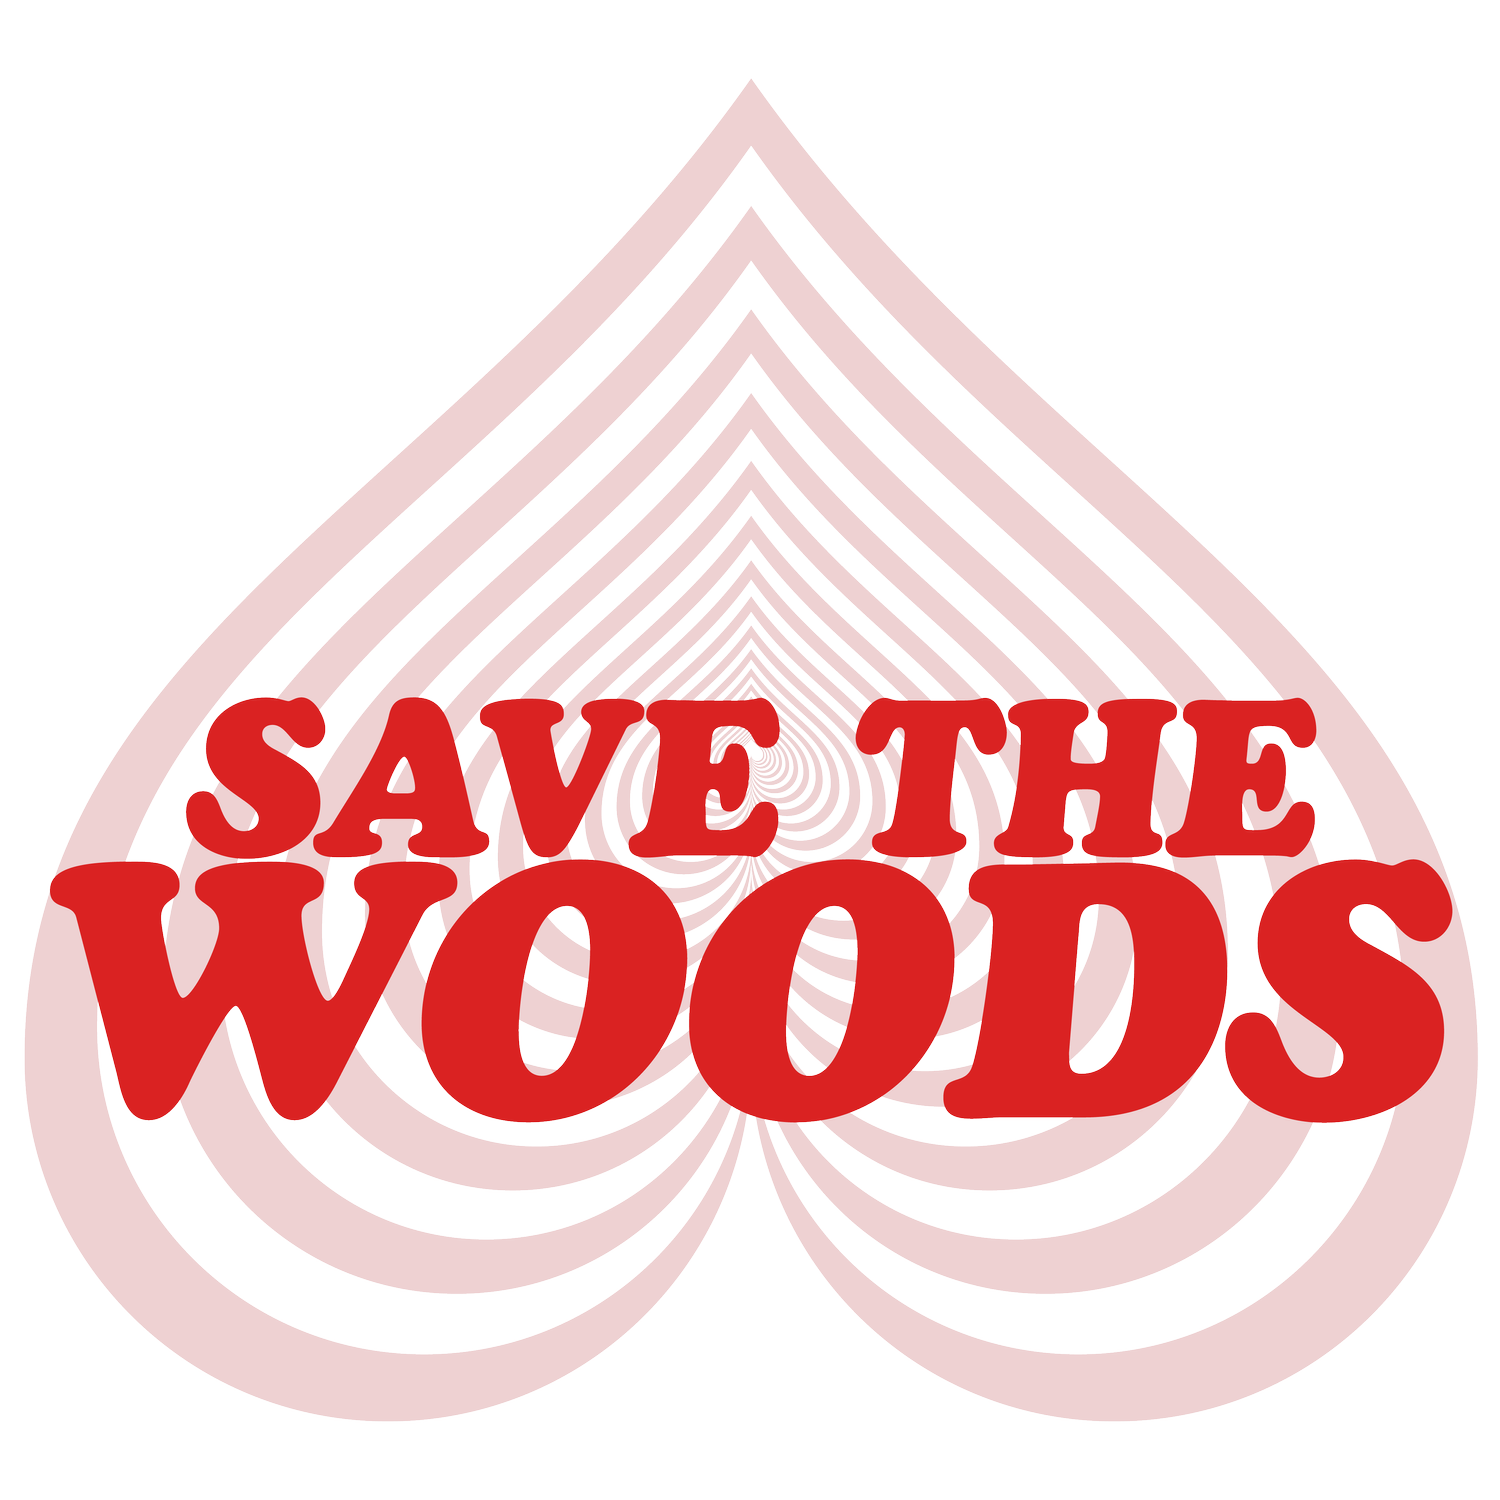 SAVE THE WOODS